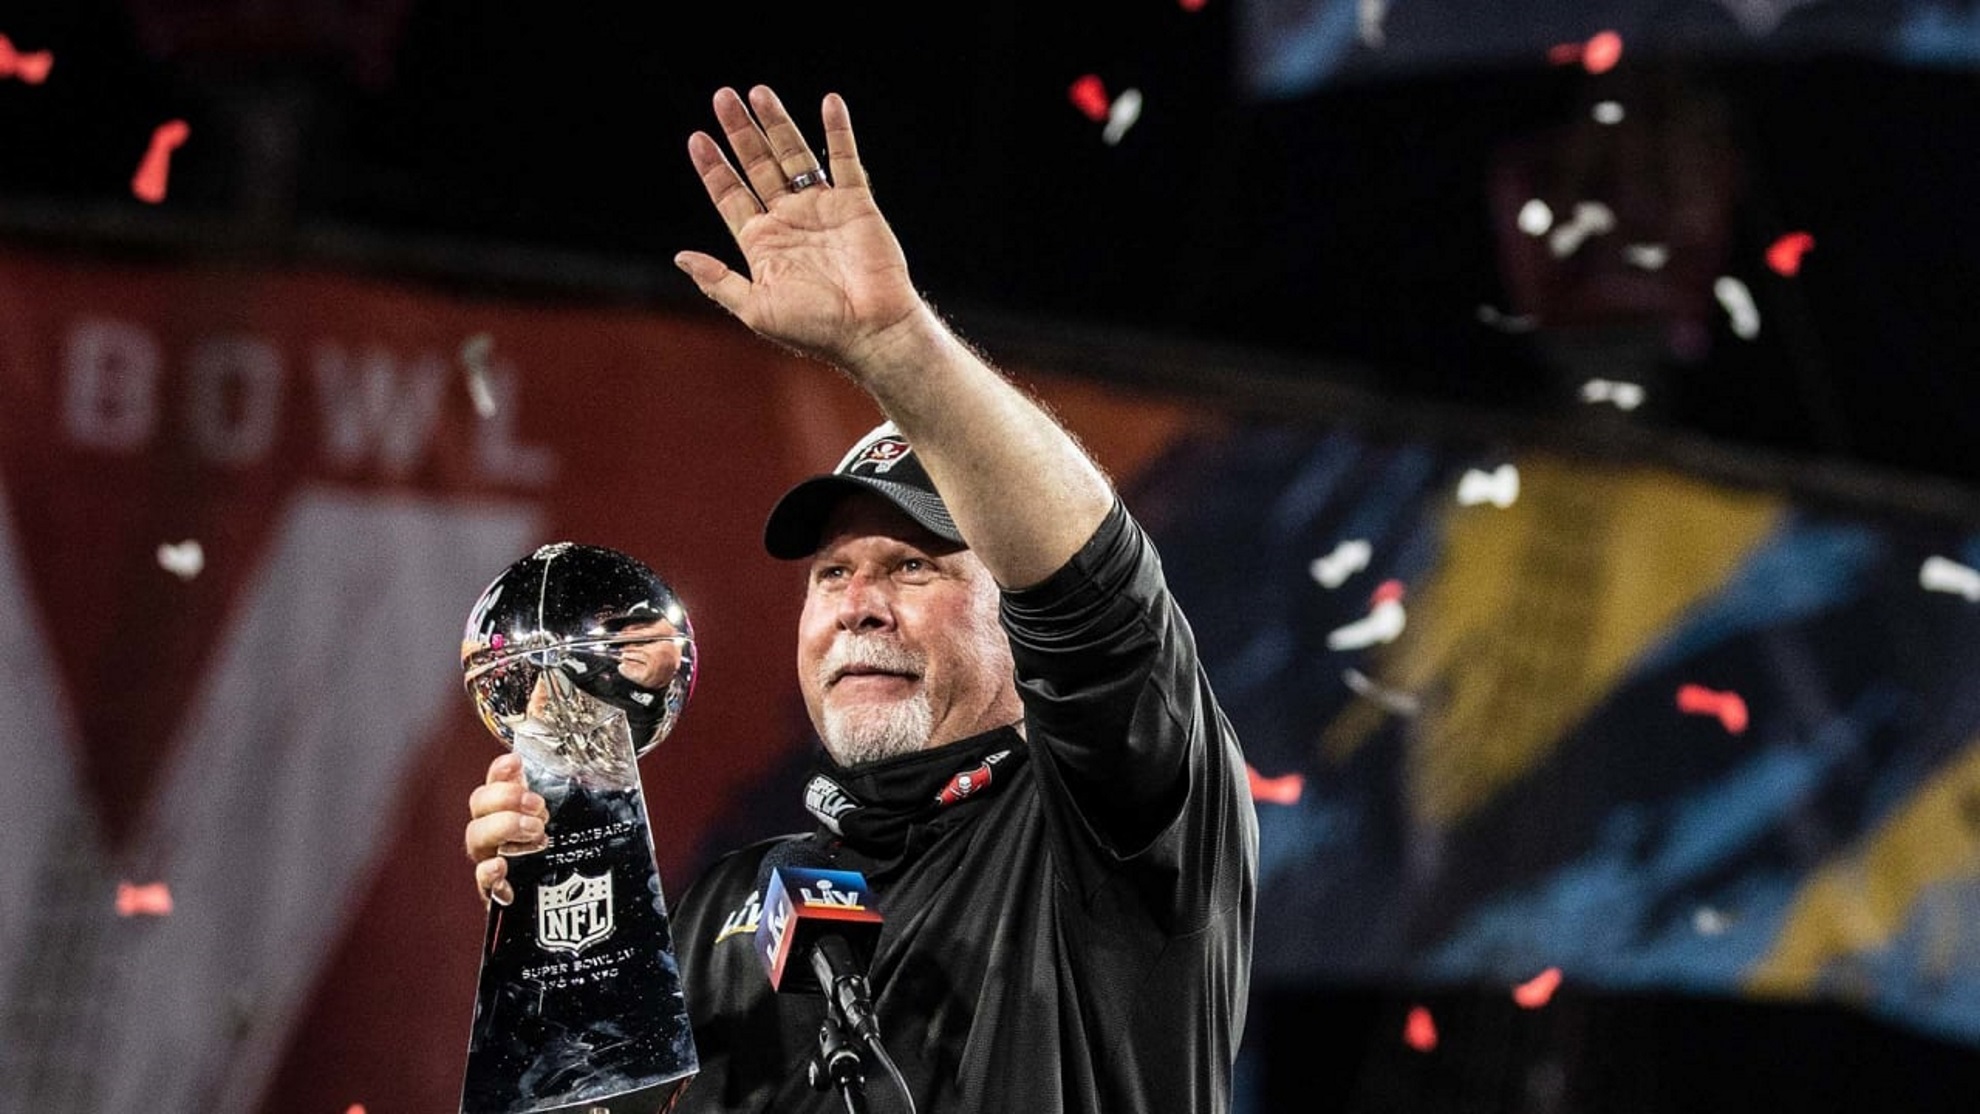 Bruce Arians retires as head coach of the Tampa Bay